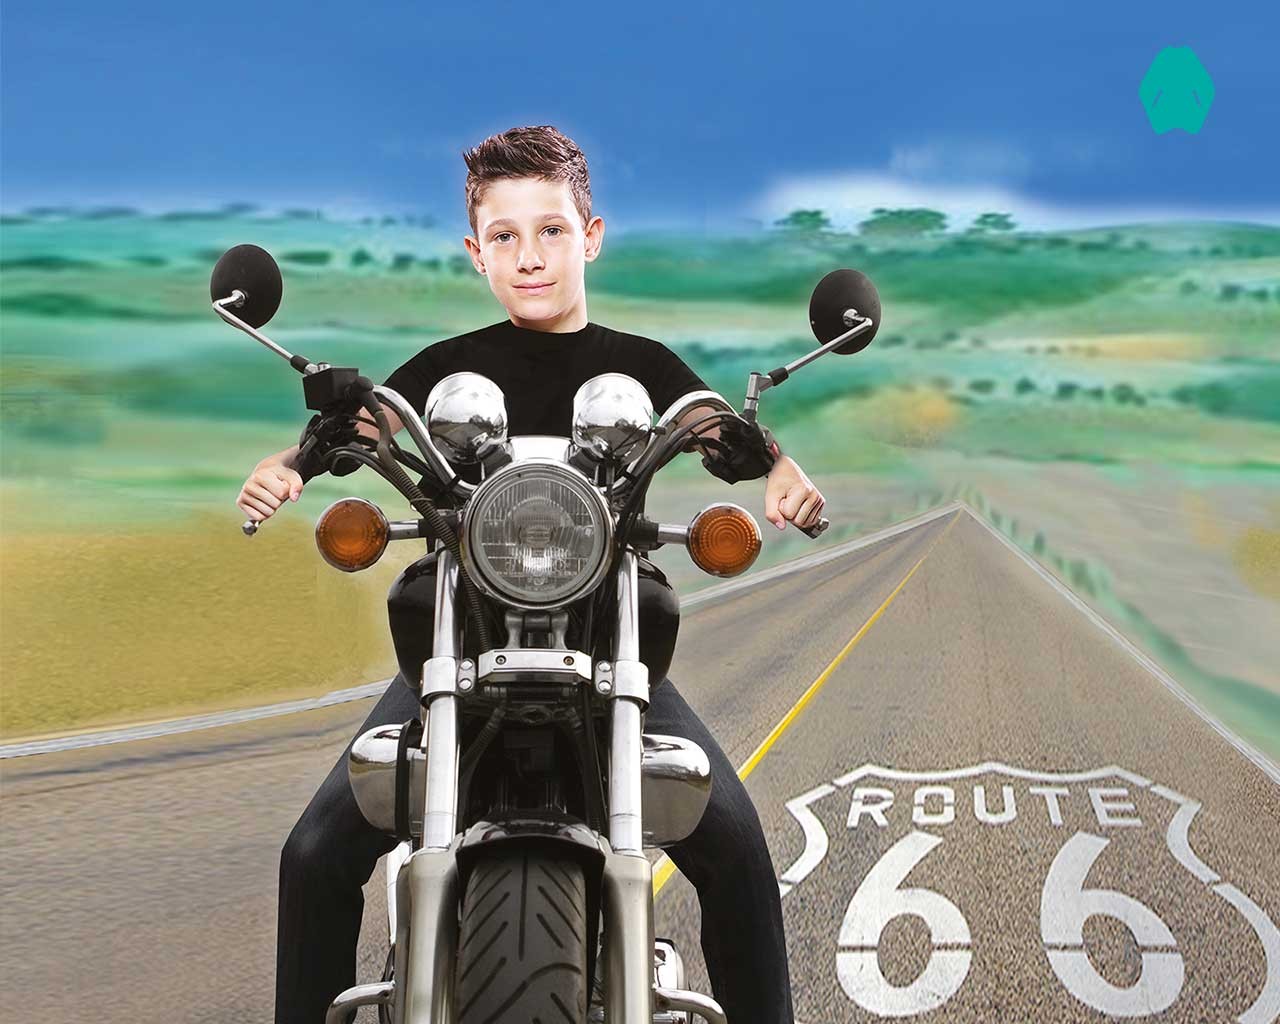  Trend-Design Youngster Easy Rider (Motorad) 